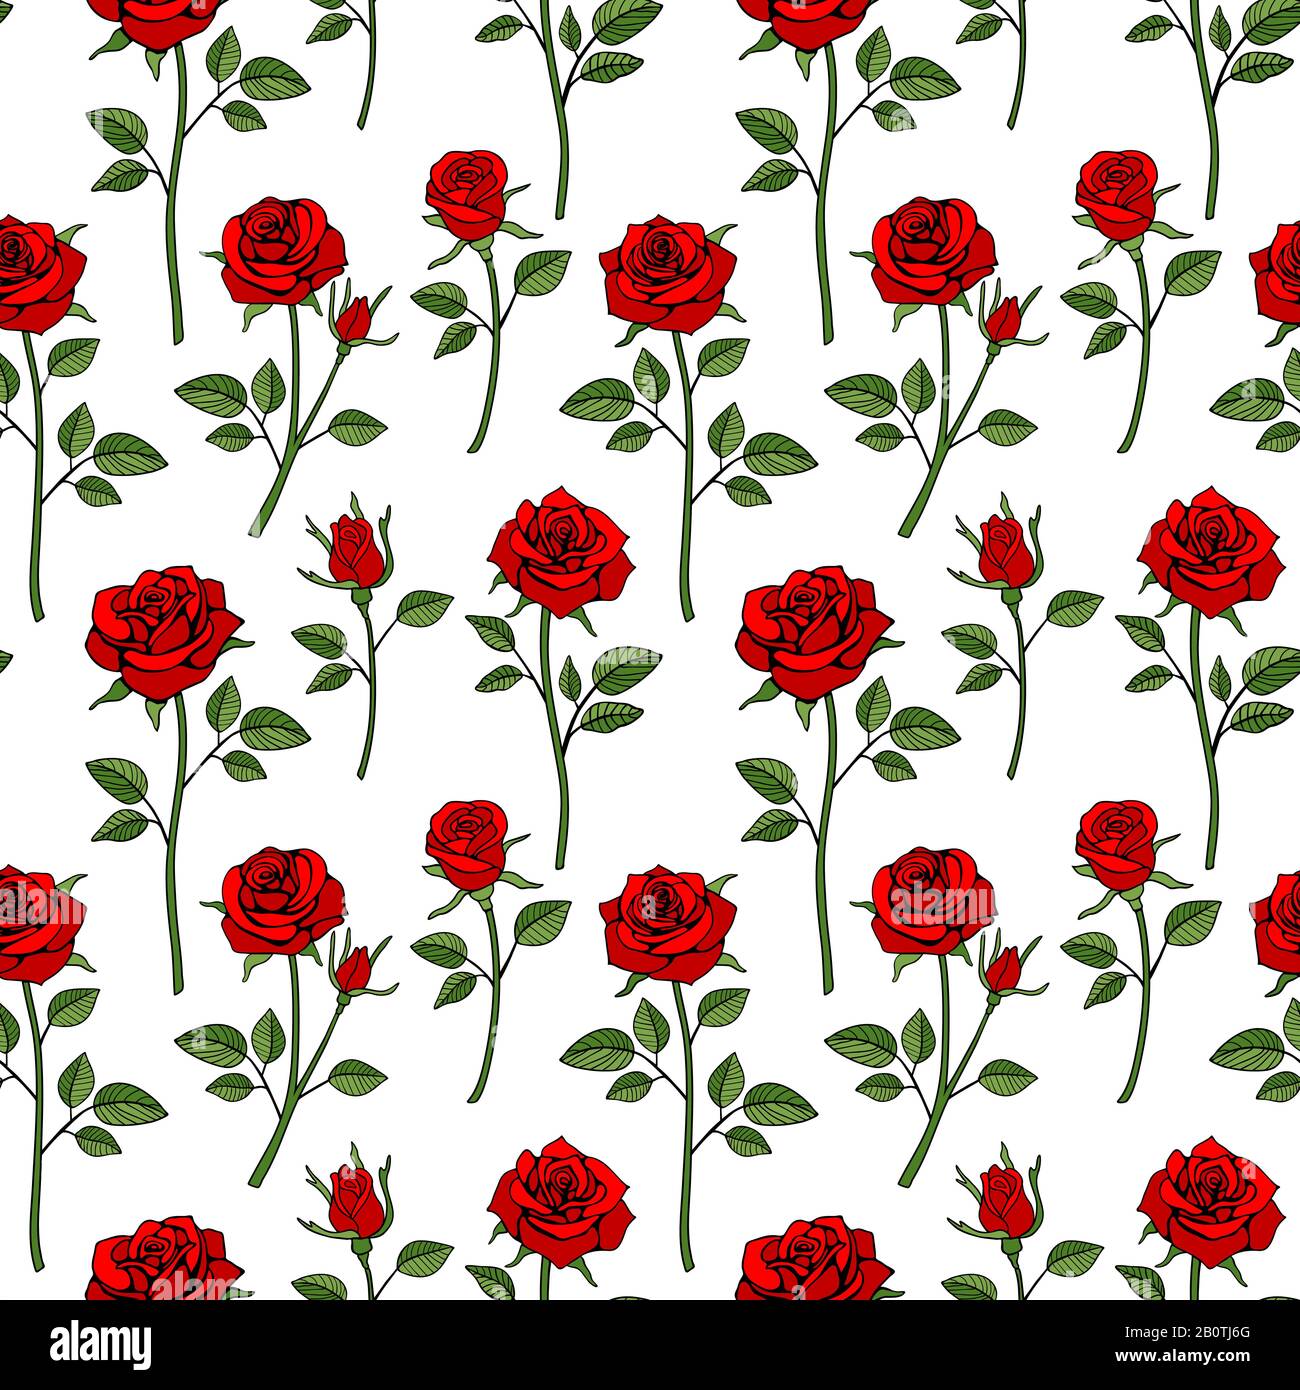 Floral english victorian seamless background. Garden red rose pattern. Illustration of flower rose with green leaf Stock Vector